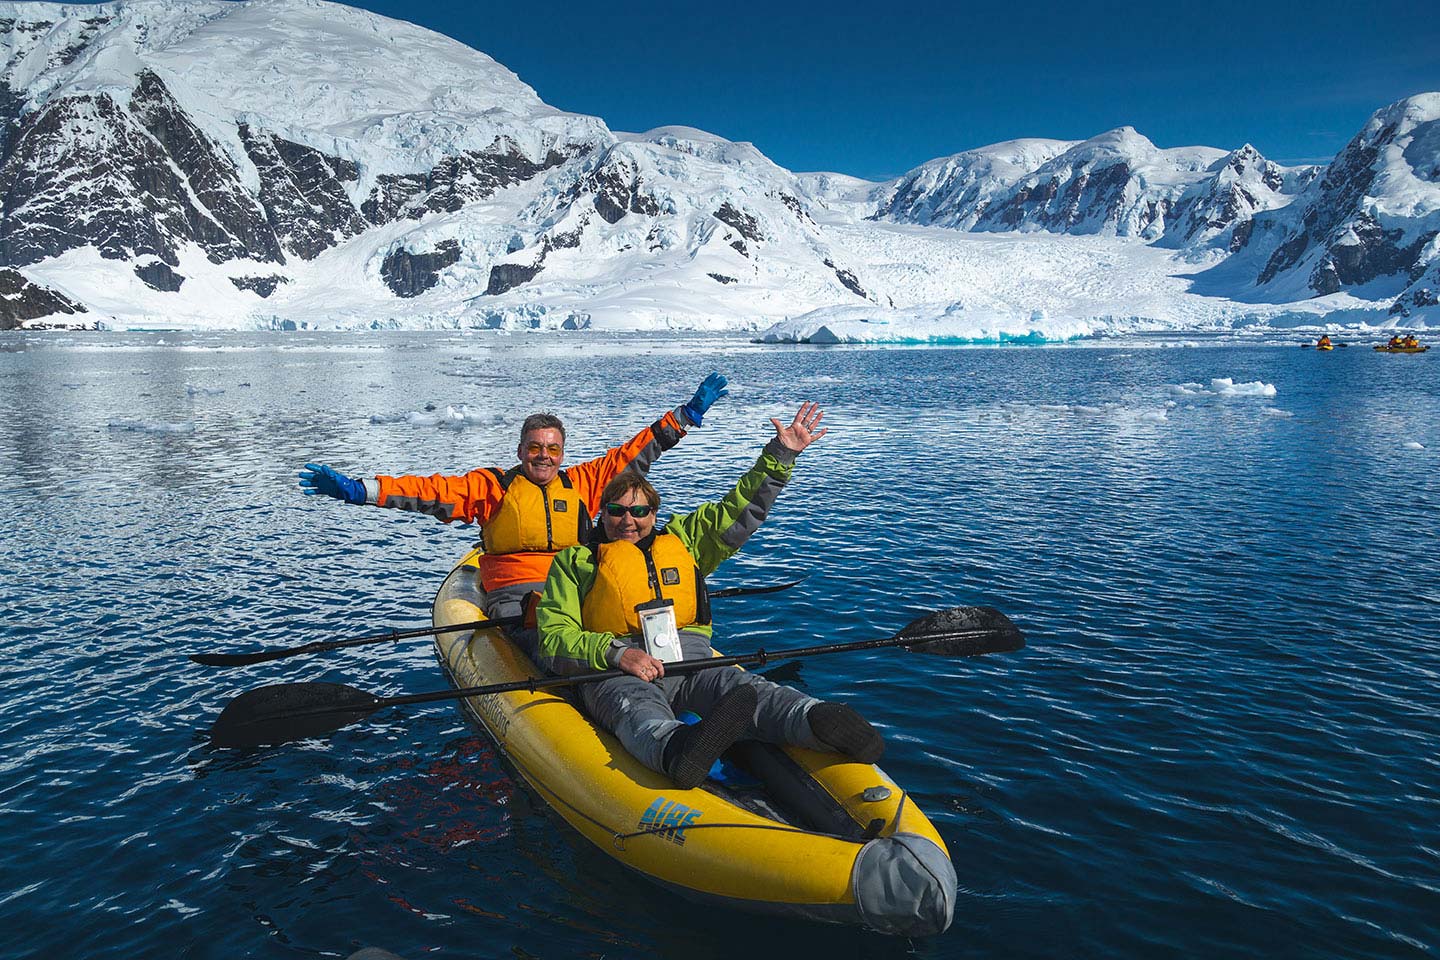 Quark Expeditions guests participate in the Sea Kayaking program during an Antarctic voyage.